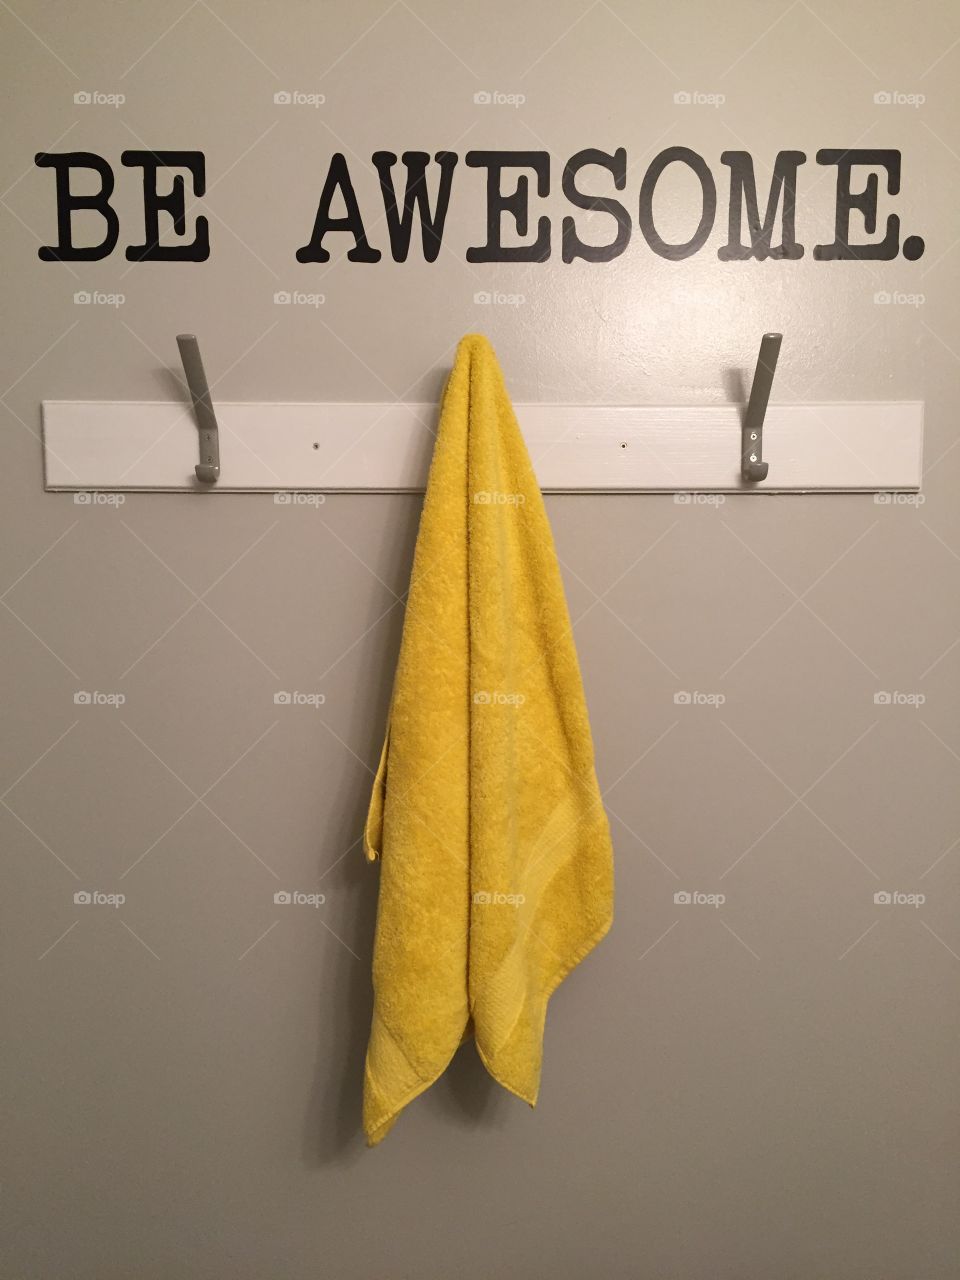 Be Awesome written on bathroom wall above bright yellow towel. 